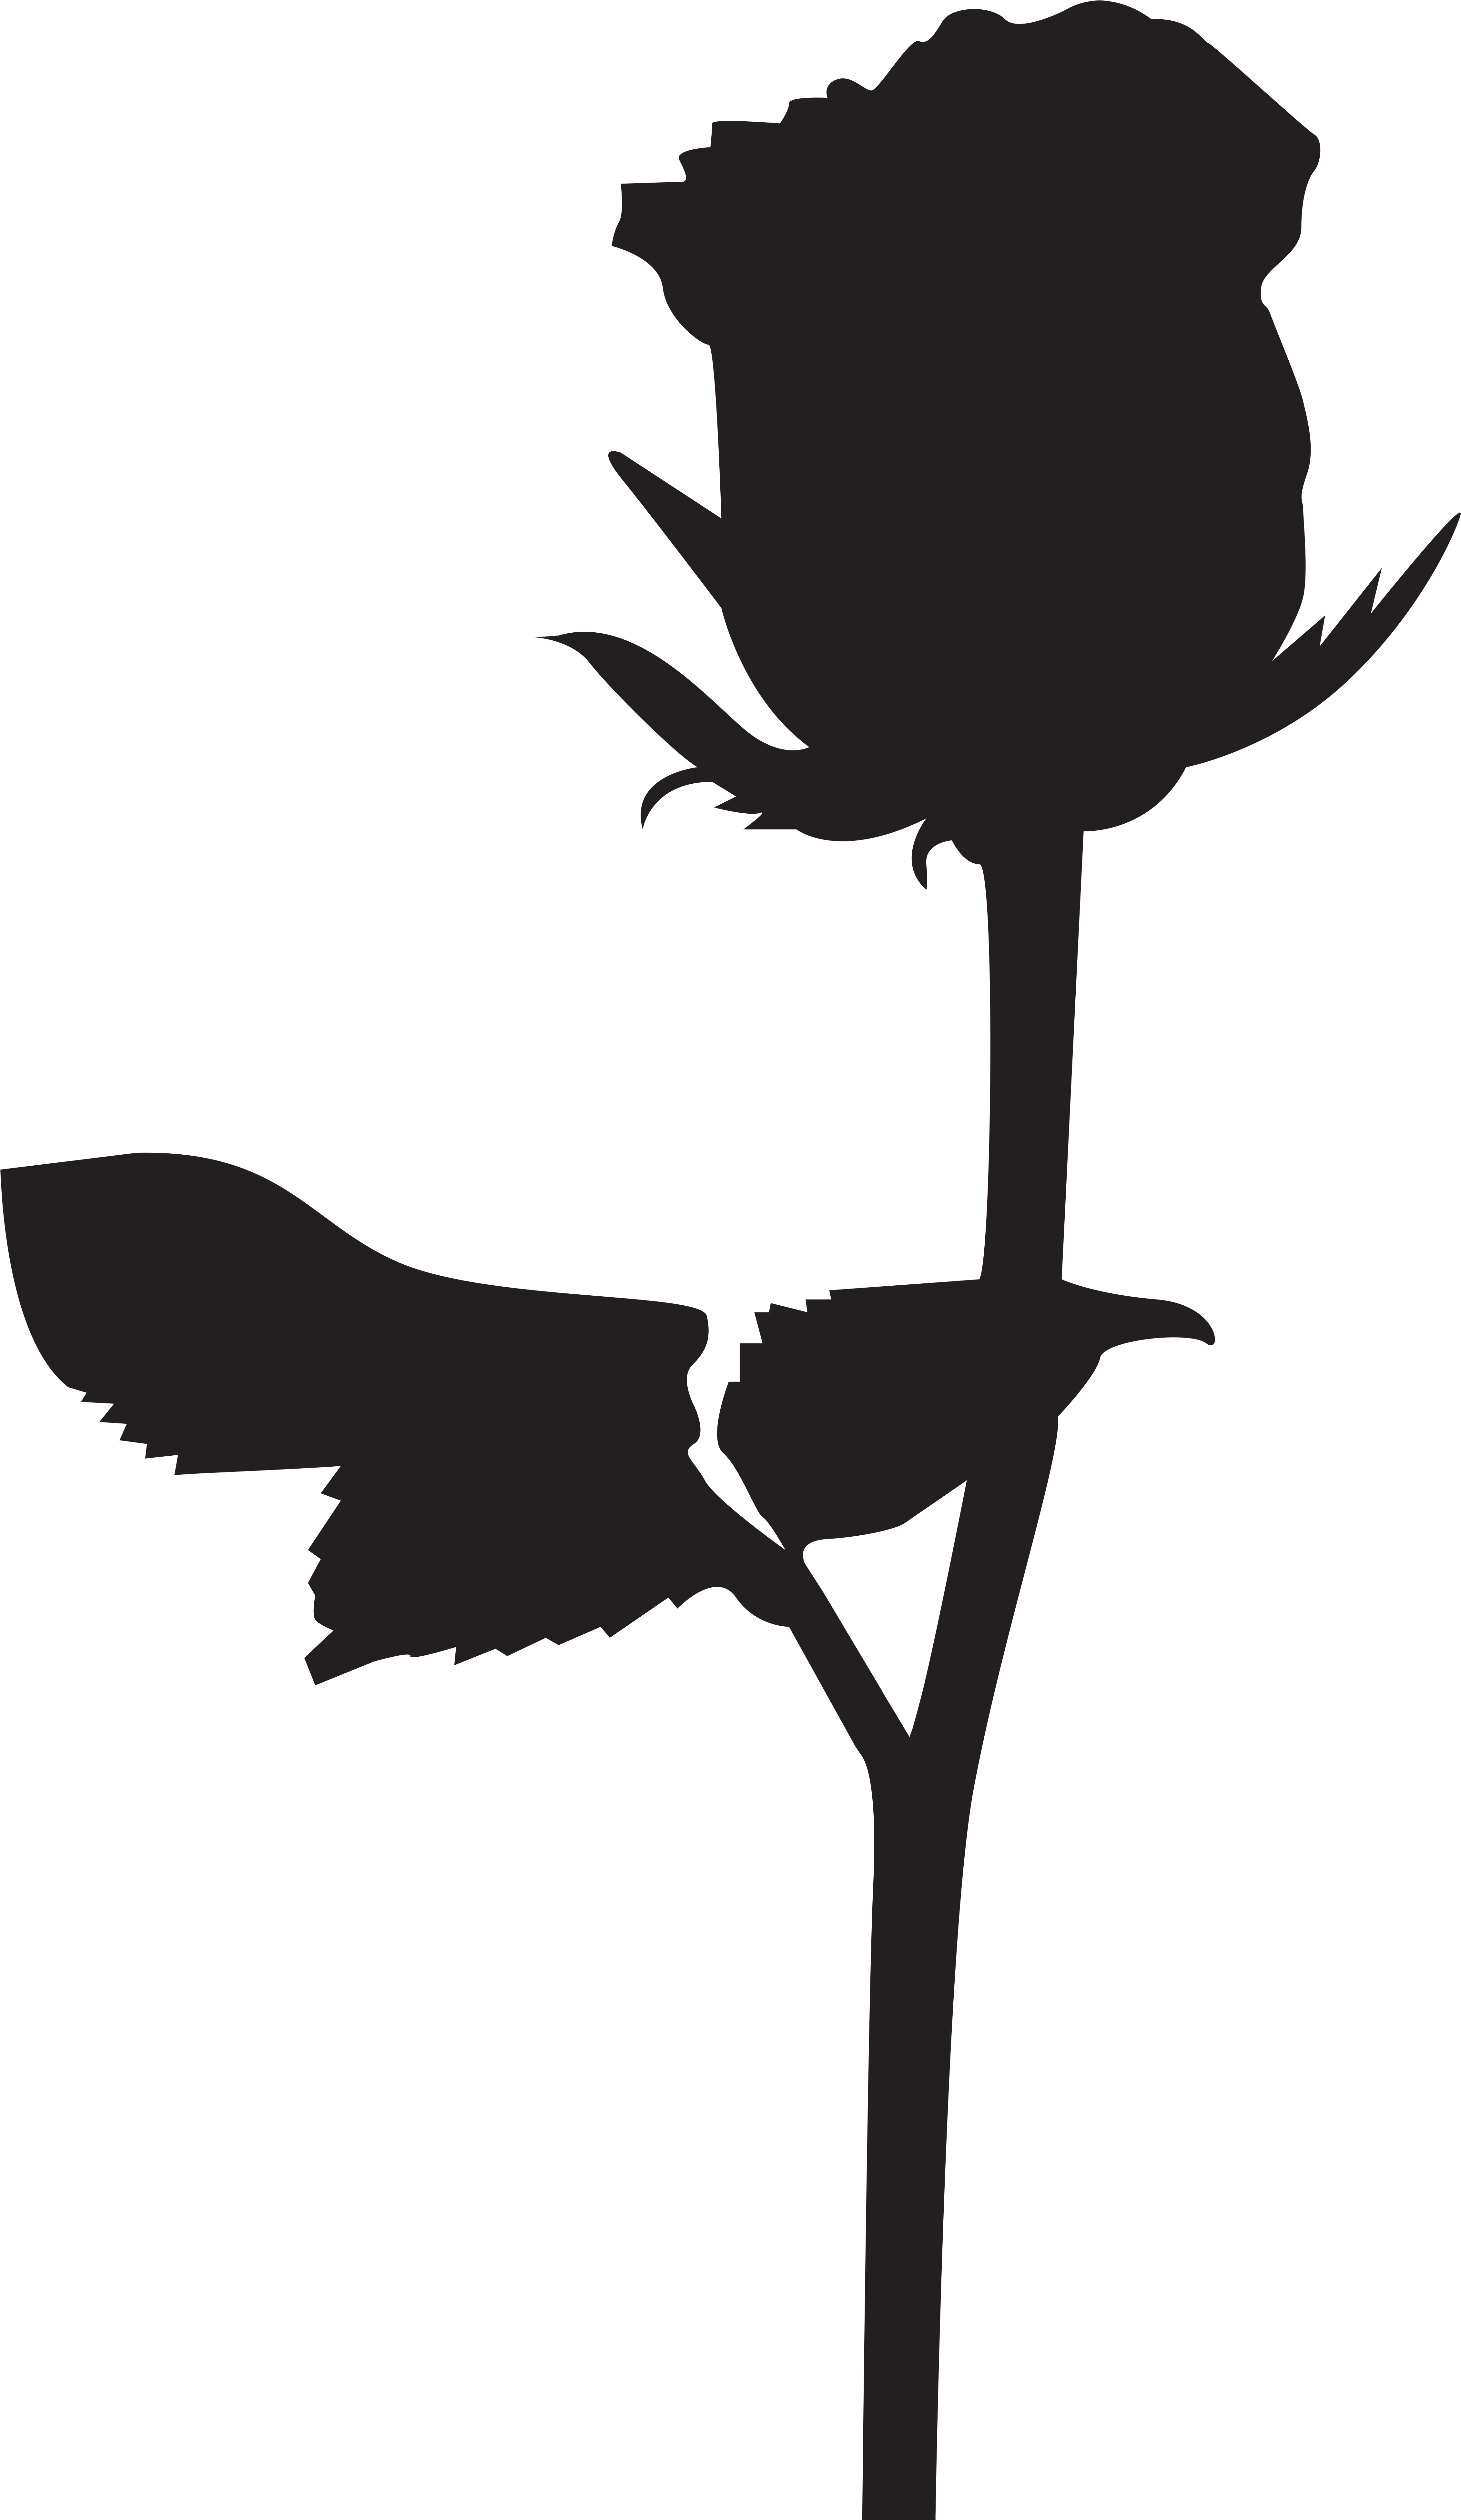 15 Beauty And The Beast Silhouette Png For Free Download - Silhouette Of A Rose (4624x8000), Png Download